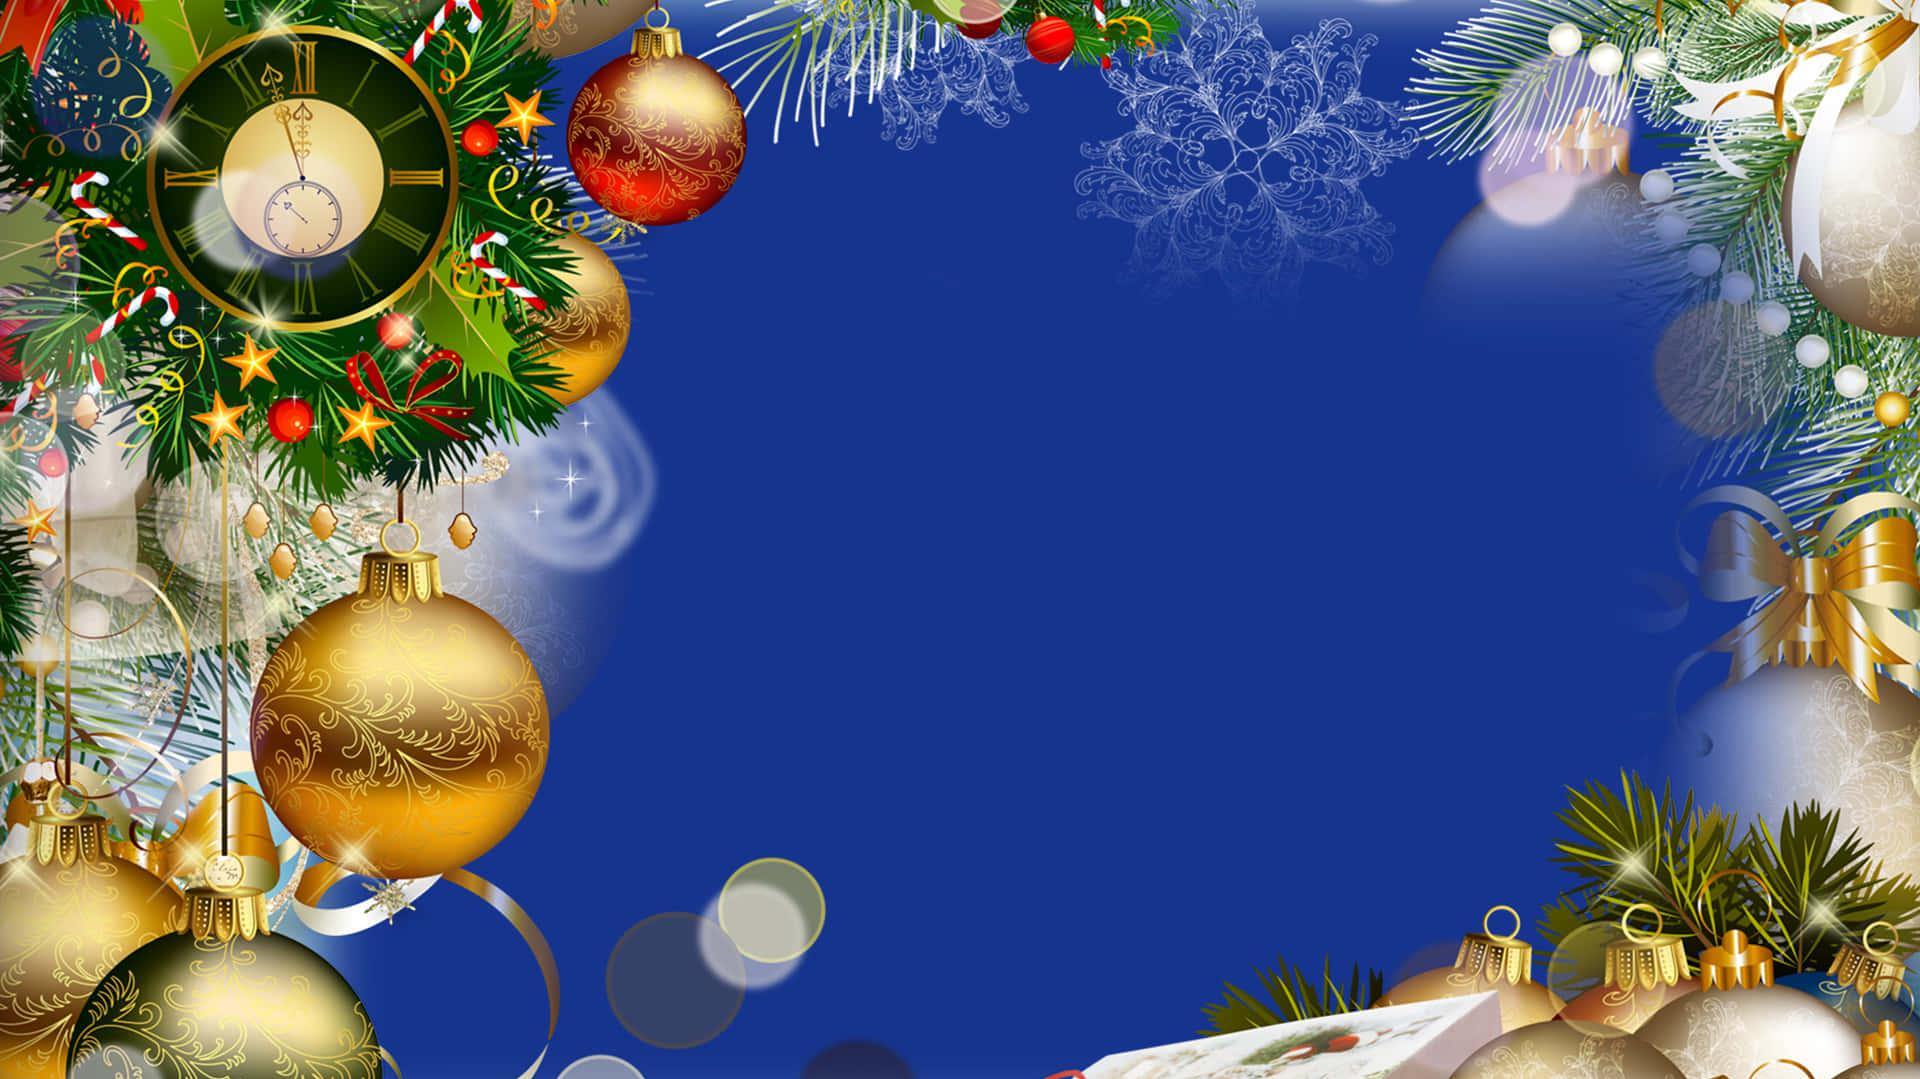 Download Festive Christmas Background with Glowing Lights